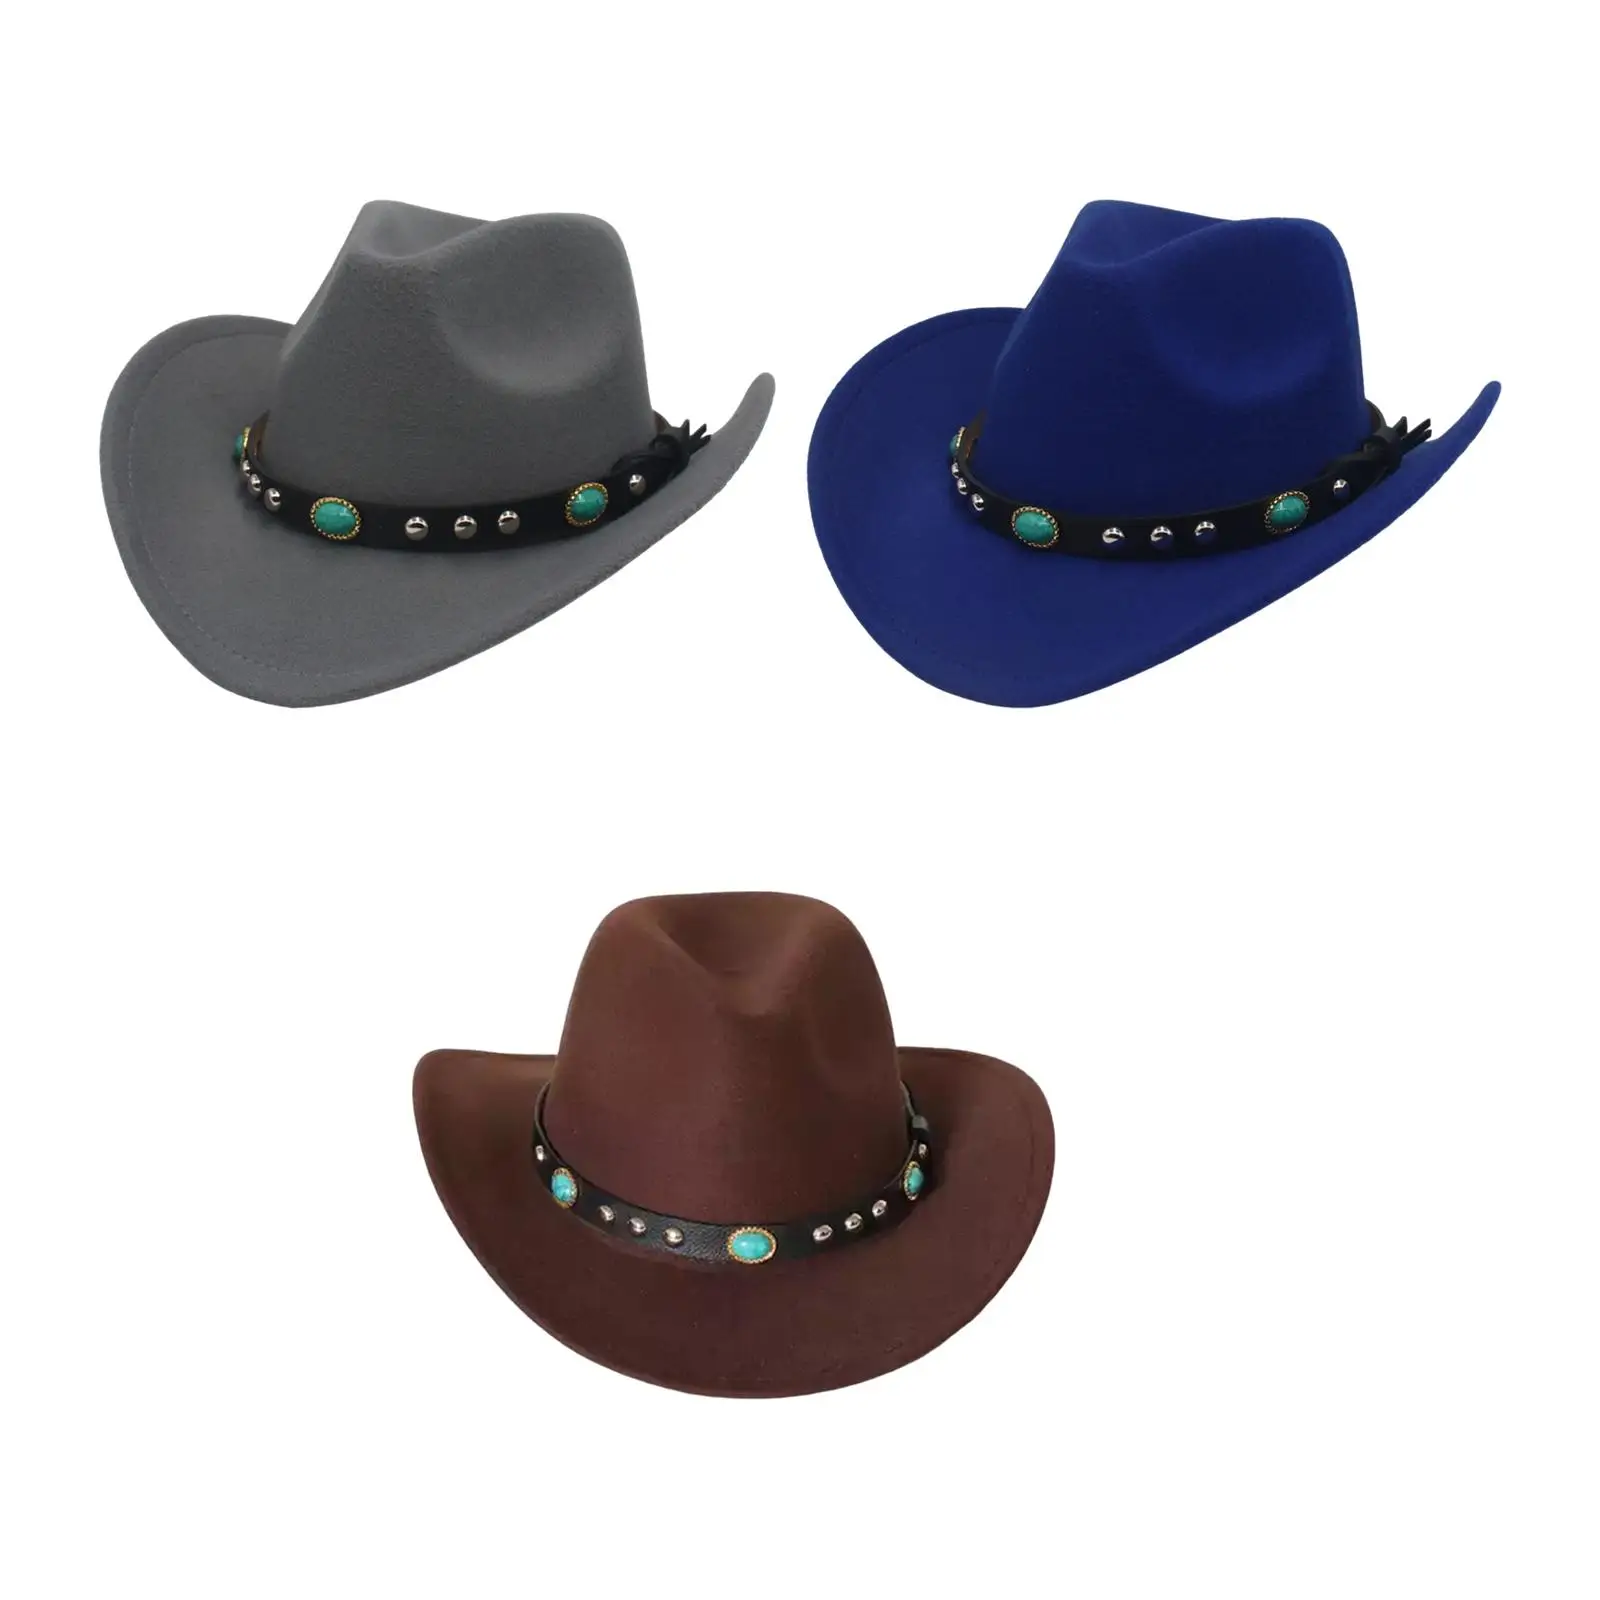 Western  Hat Wide Brim  Buckle Decor Sun Visor Hat Panama Cowgirl    for Women Teens Hiking Camping Holiday